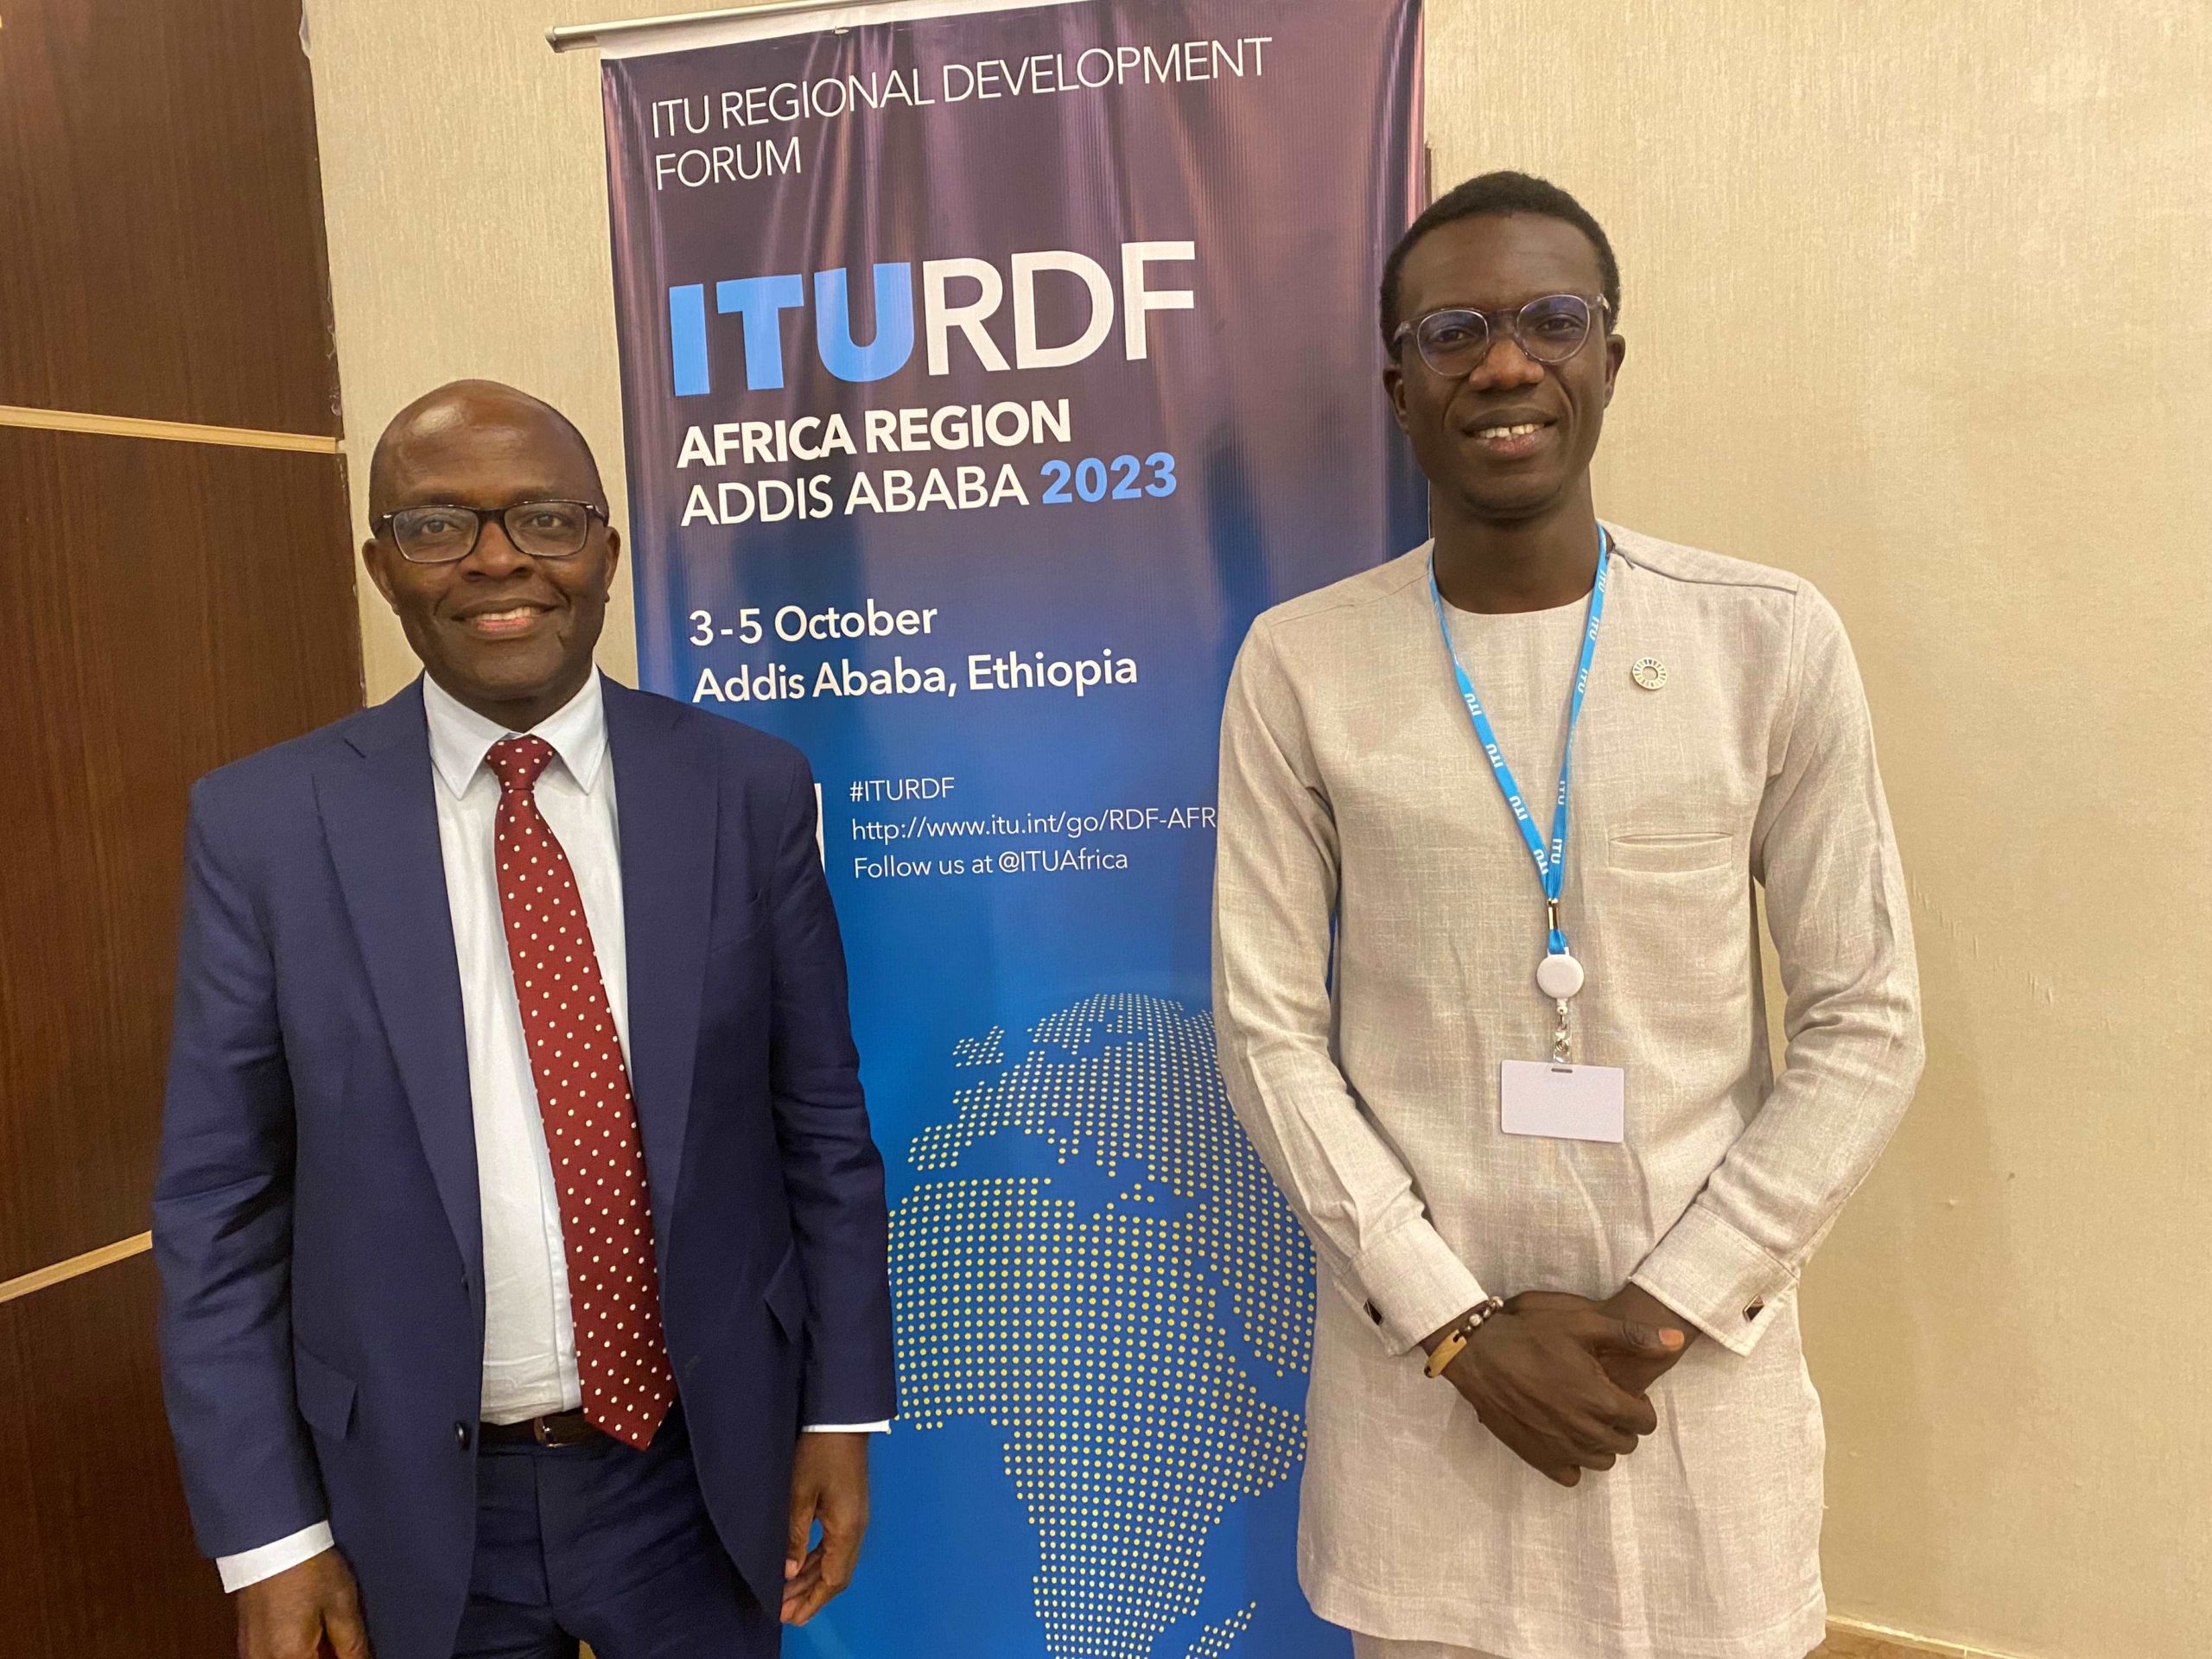 Two African men. On the left, a smiling man with a dark blue suit, white shirt and red spotted tie. On the right, another smiling man in a beige top. Behind them, a banner with ITURDF and an image of Africa